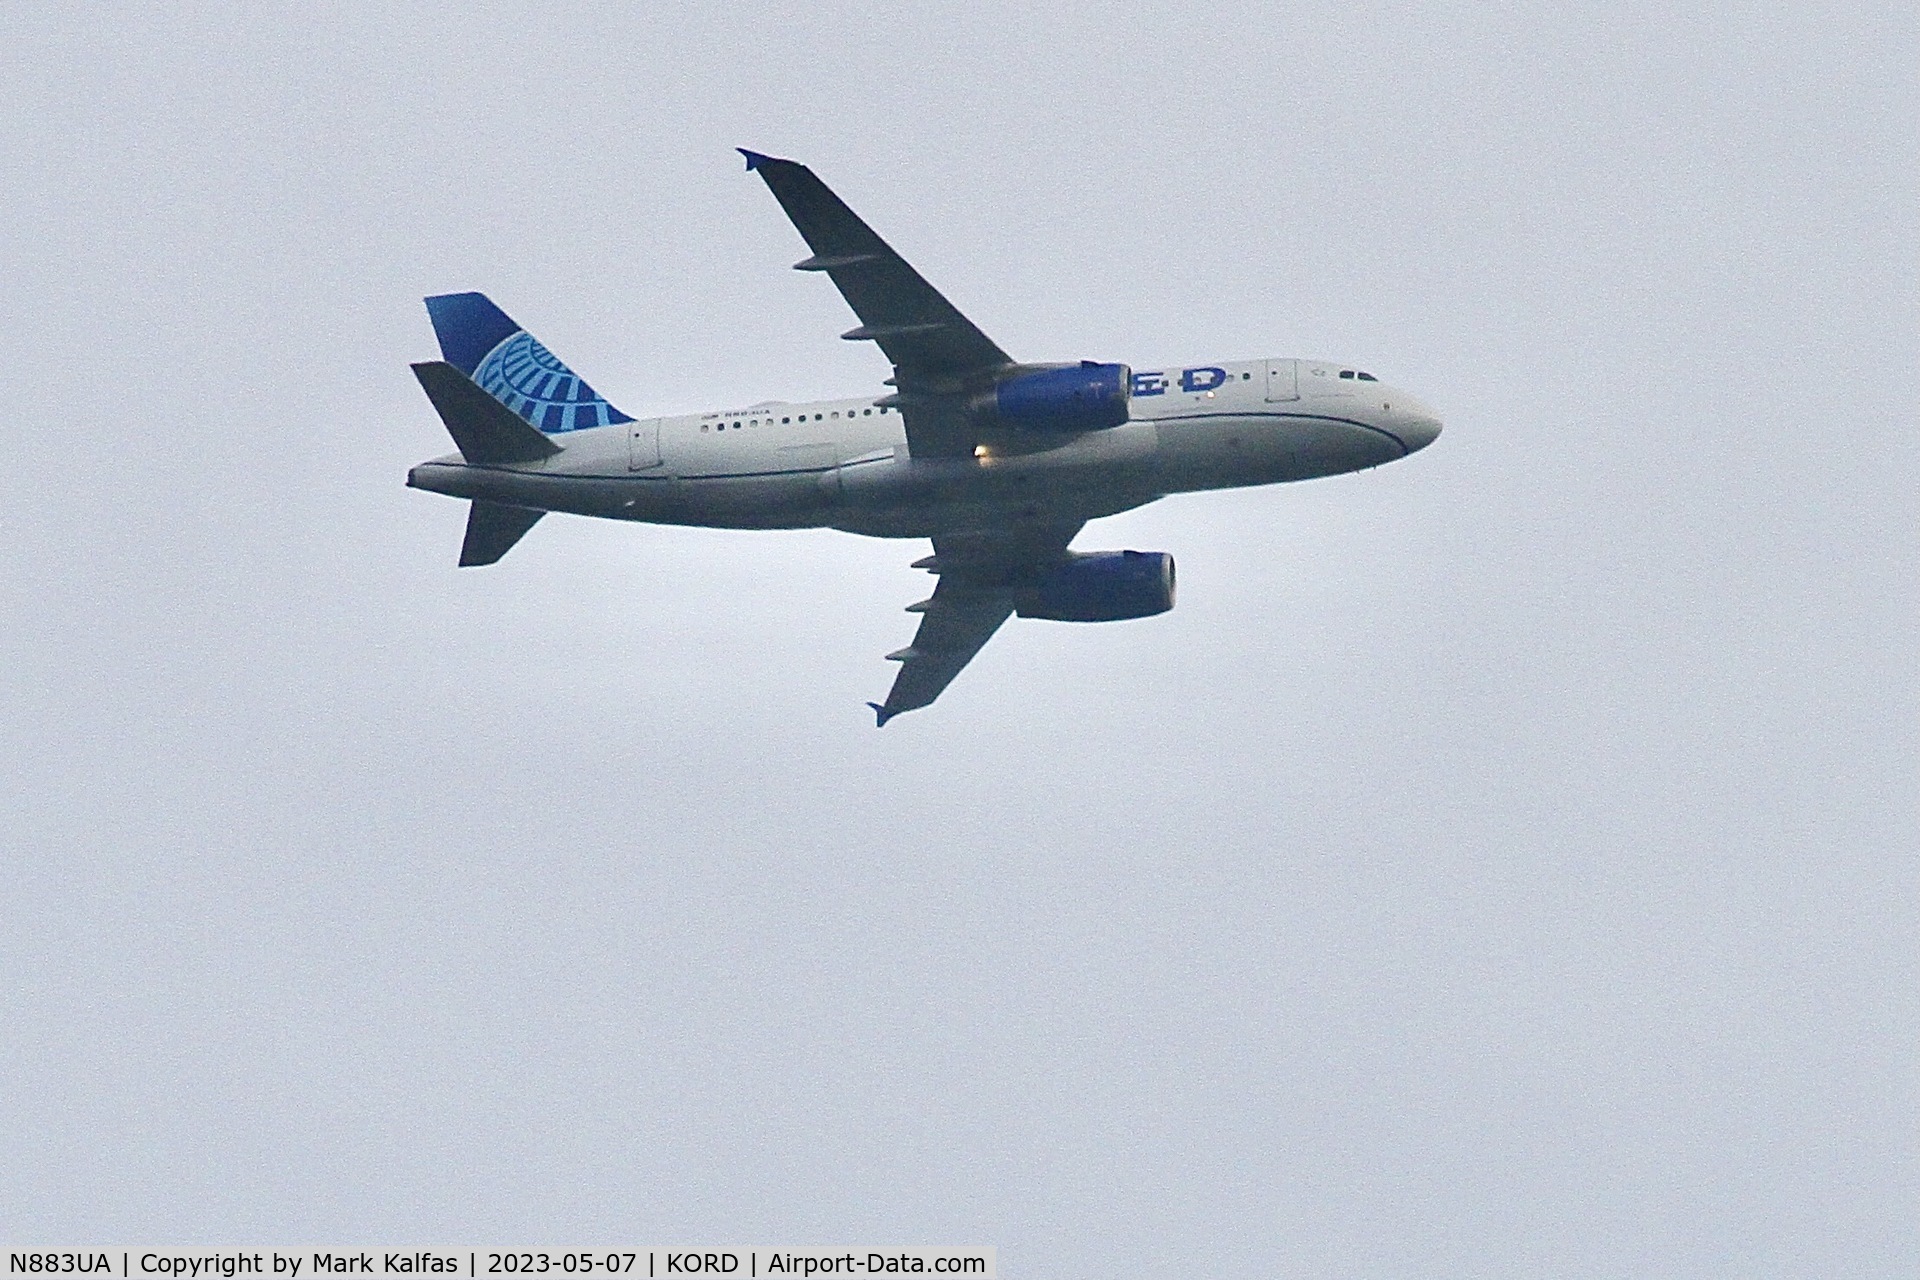 N883UA, 2005 Airbus A319-132 C/N 2574, United Airlines A319 N883UA operating as UA2227 from  RDU to ORD on approach to O'Hare